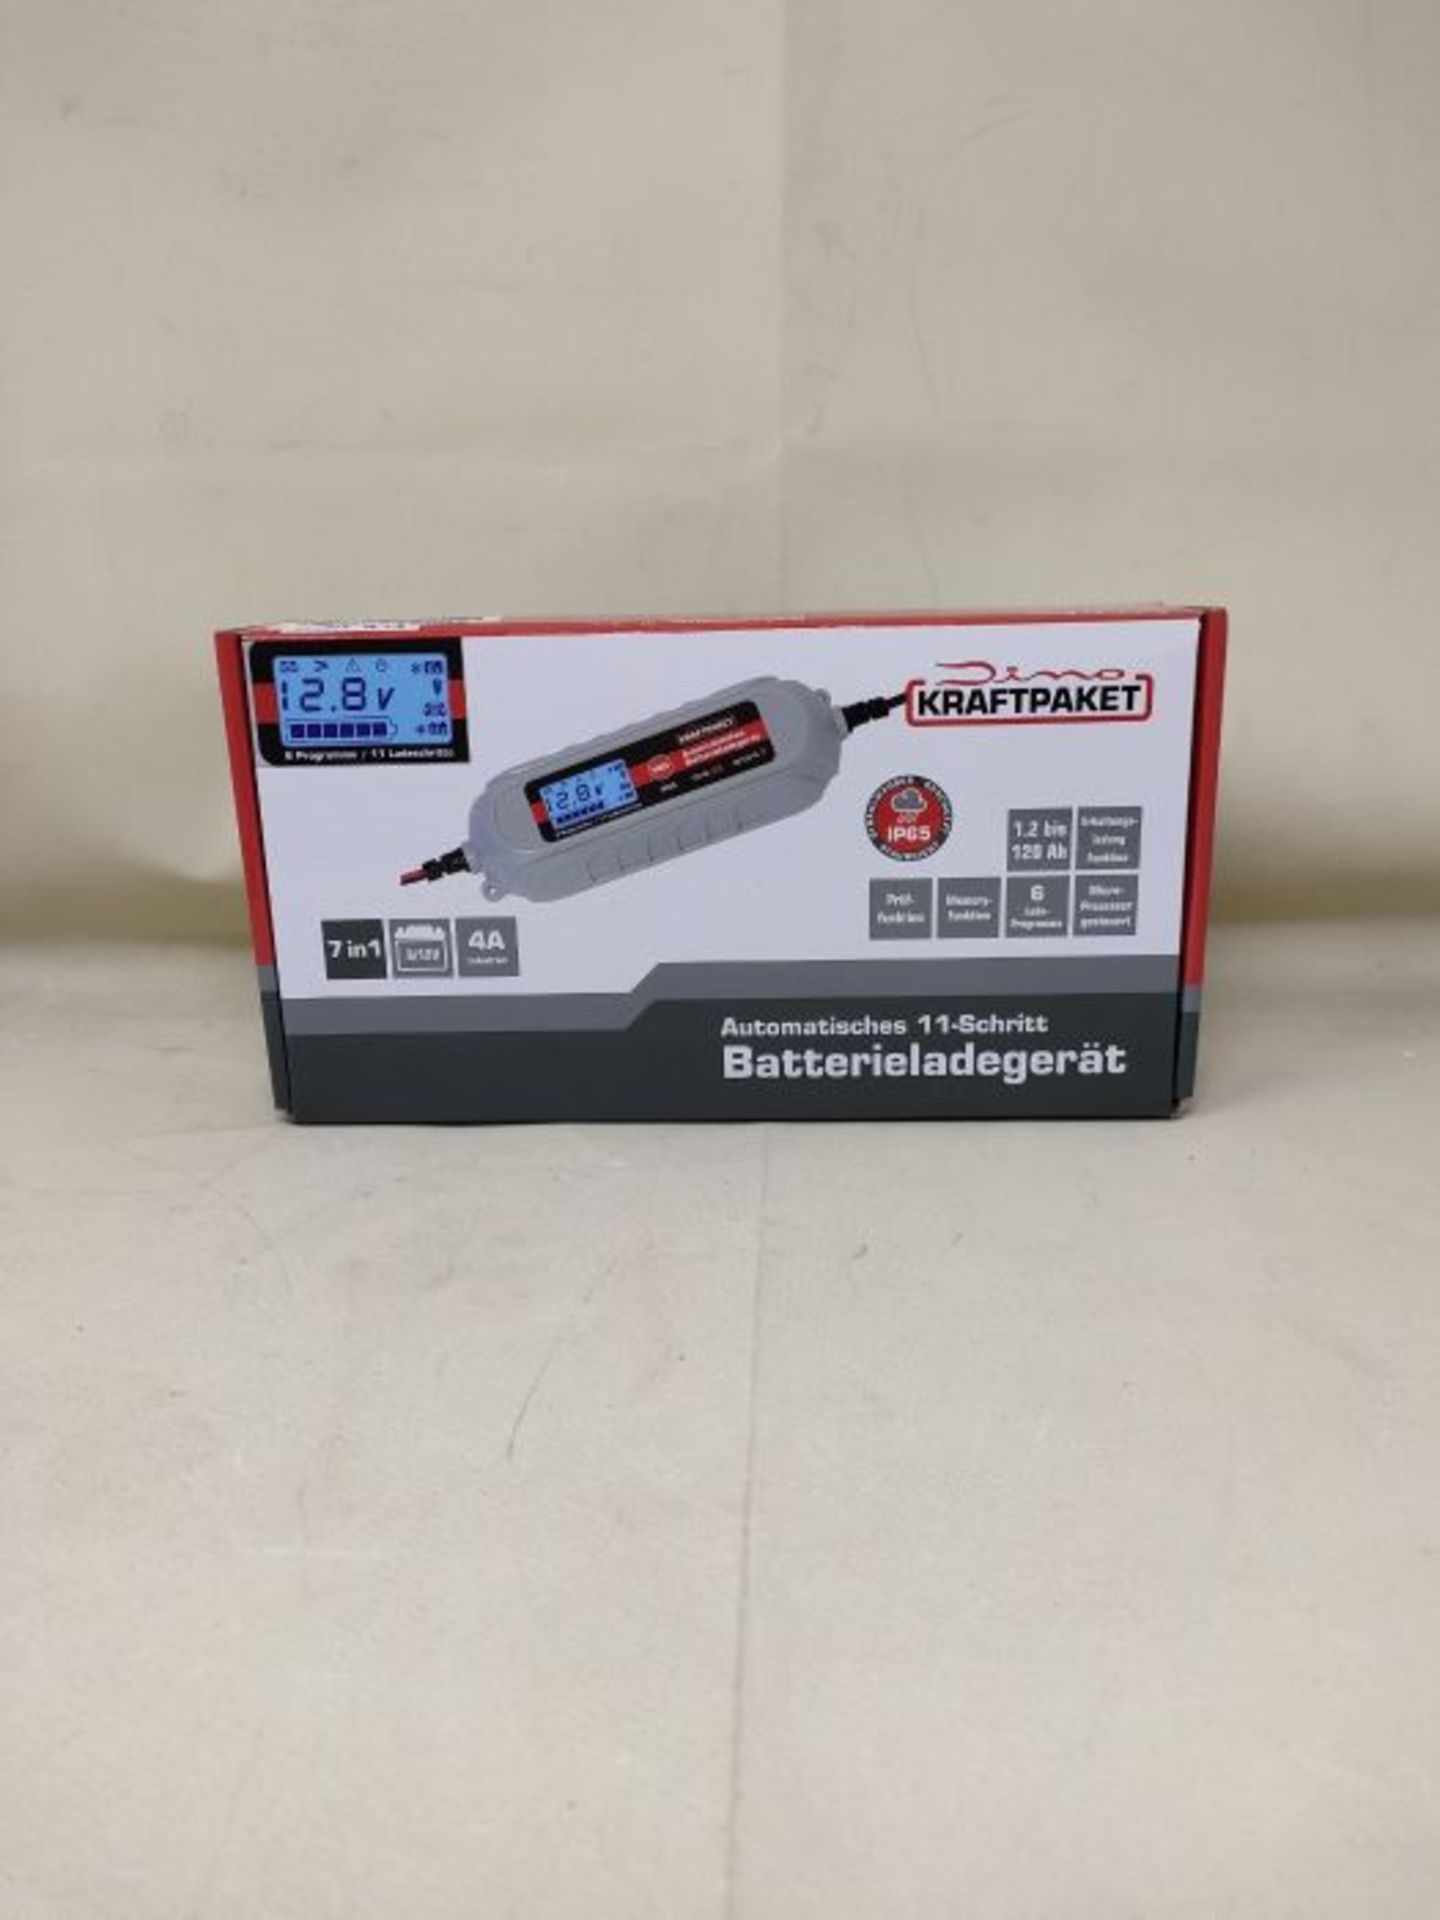 Dinosaur Power Pack 6 V/12 V/4 A Battery Charger with Tester. IP65 for Vehicle Car - Image 2 of 3